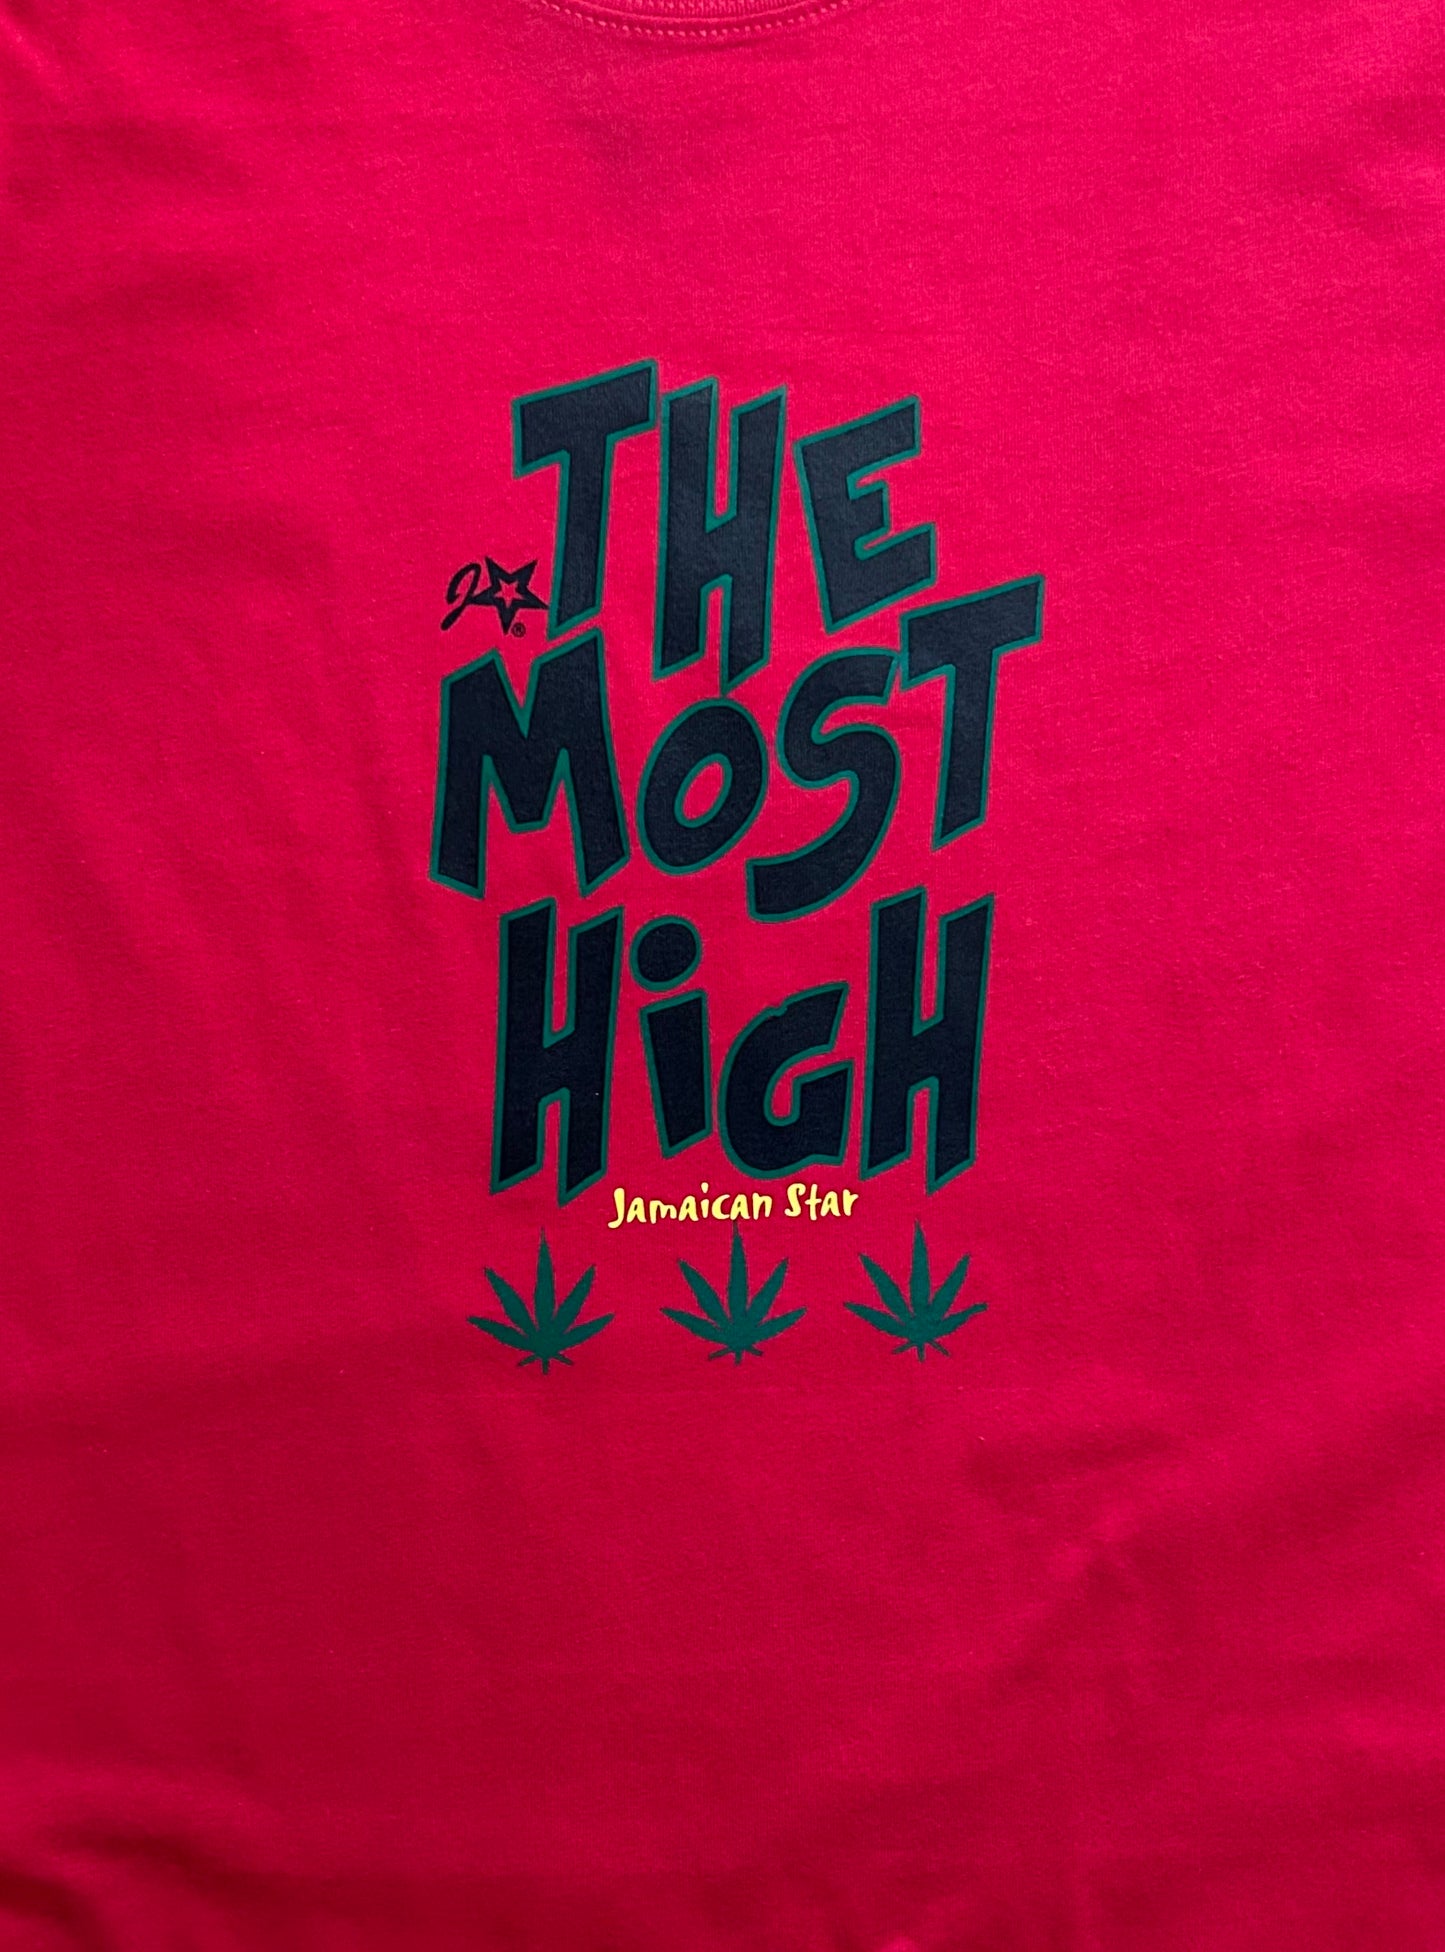 The Most High Tee